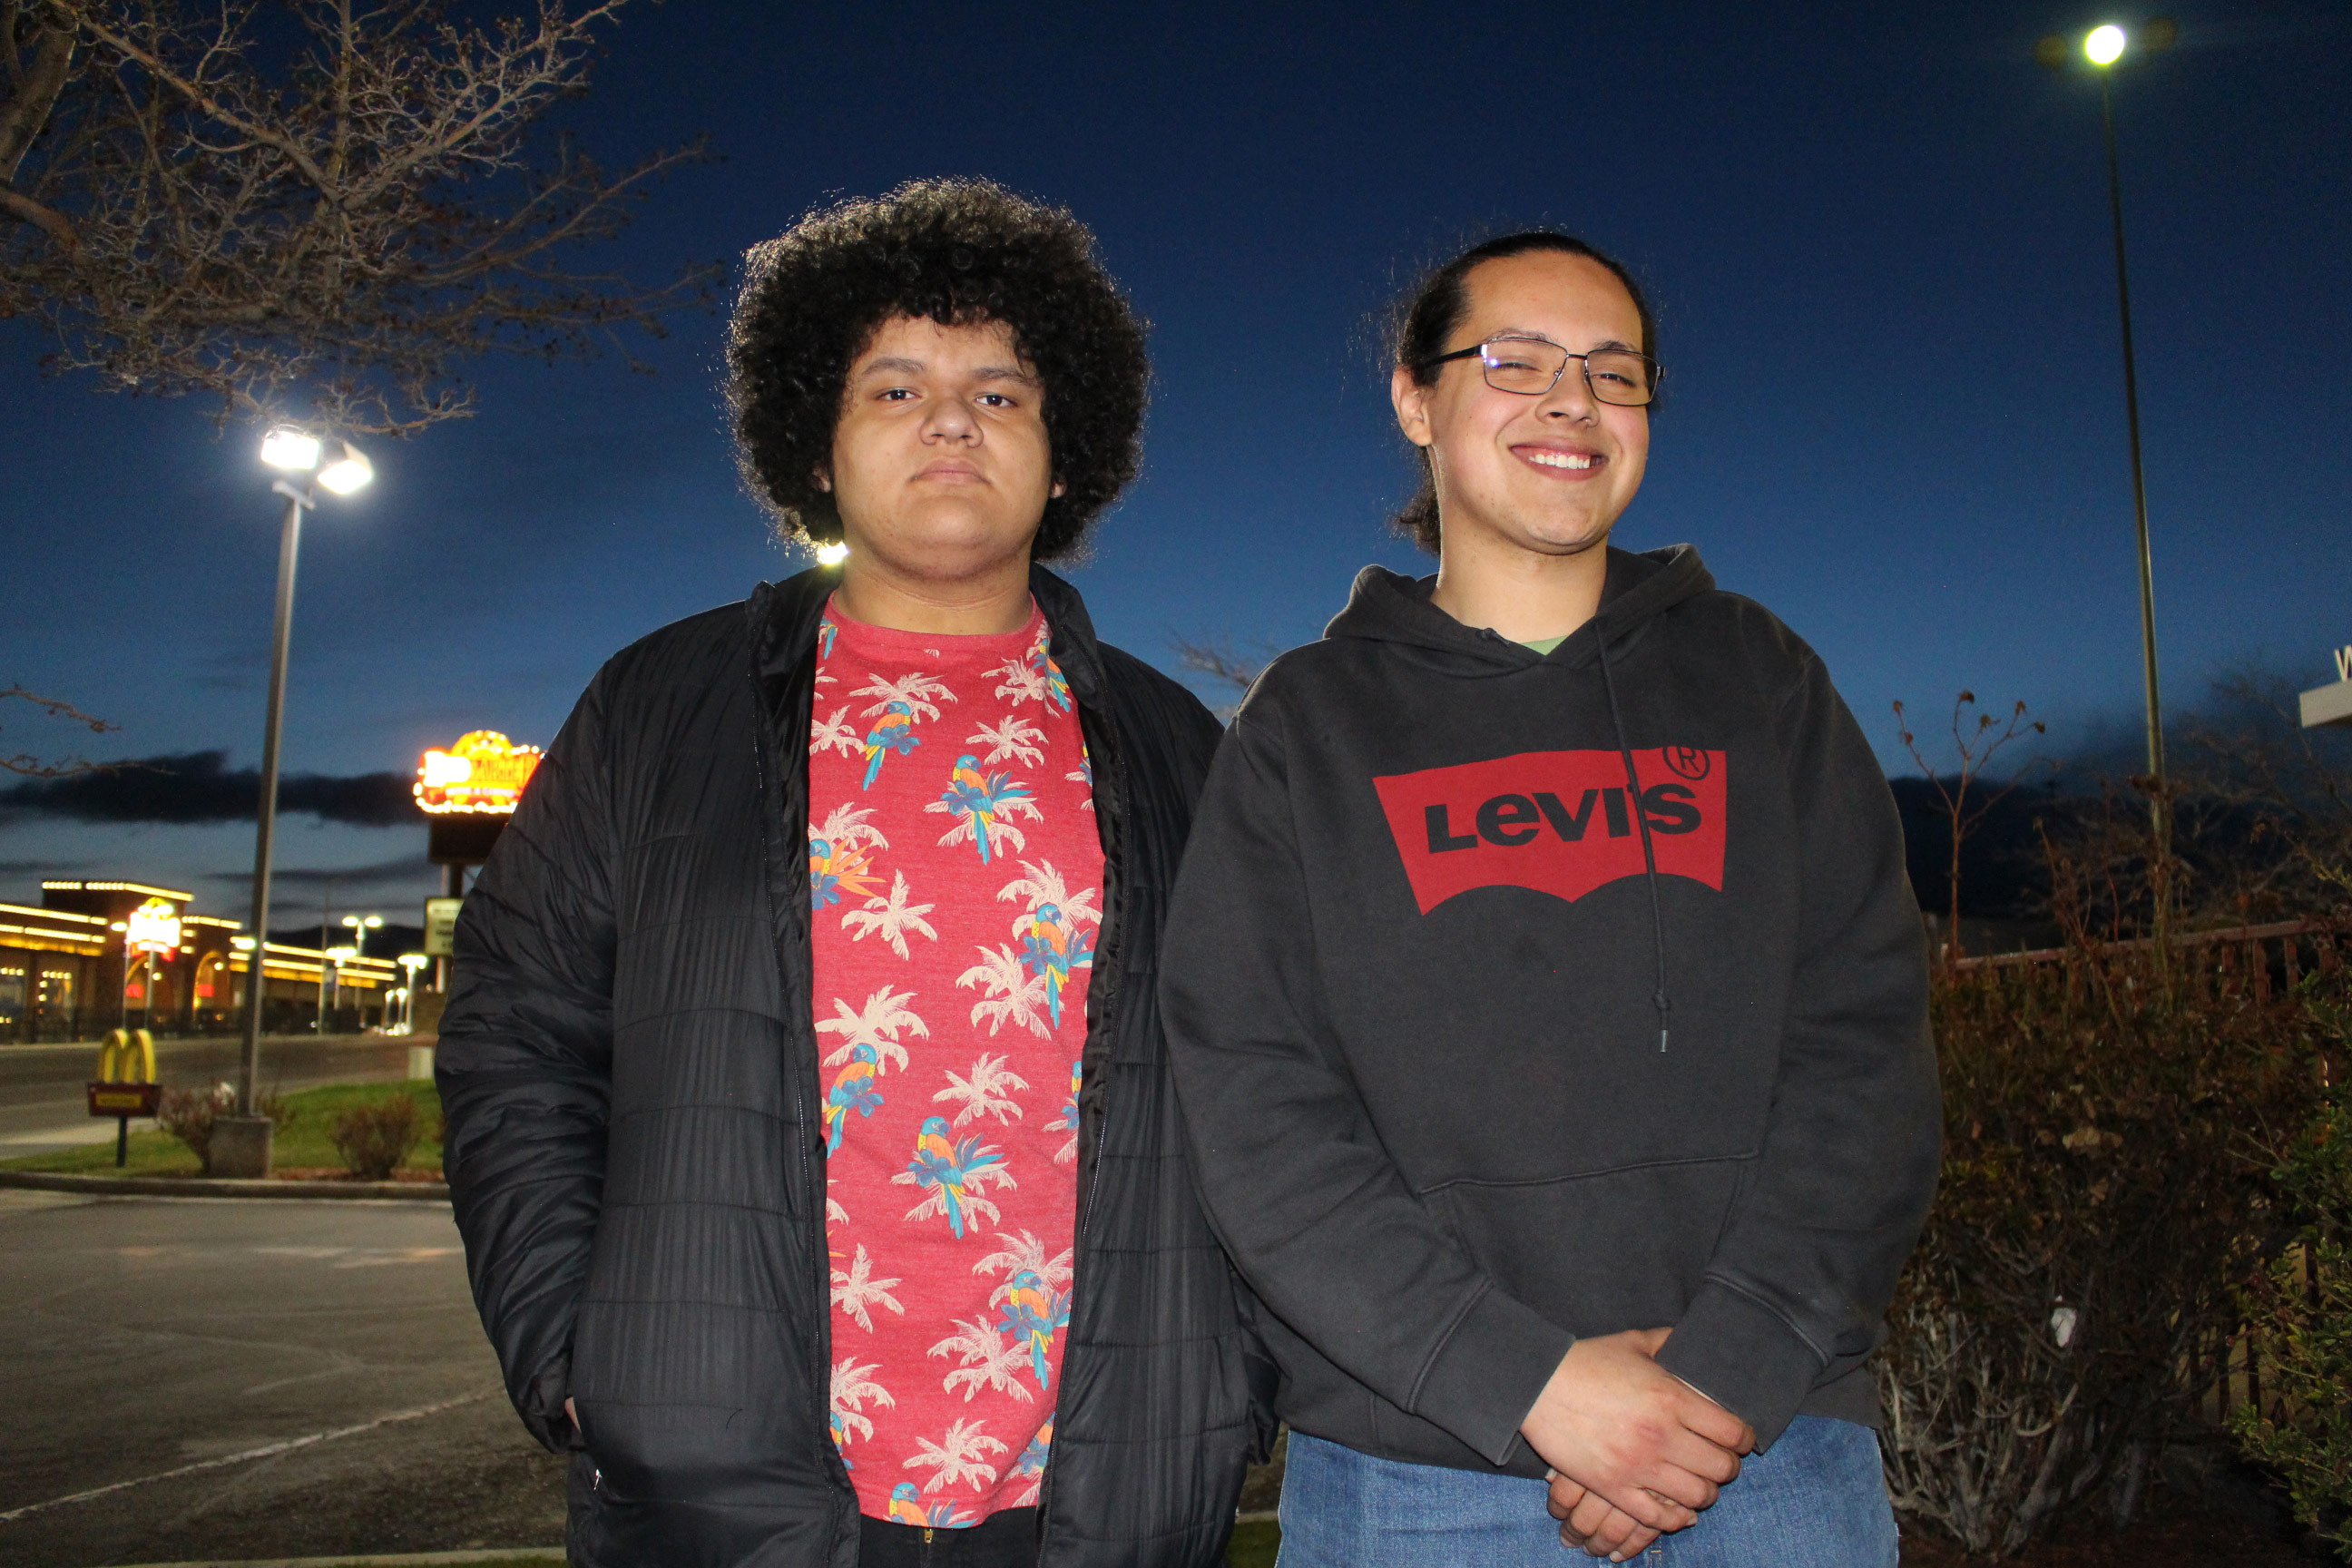 A photo of two brothers posing for a photo together outside at night.